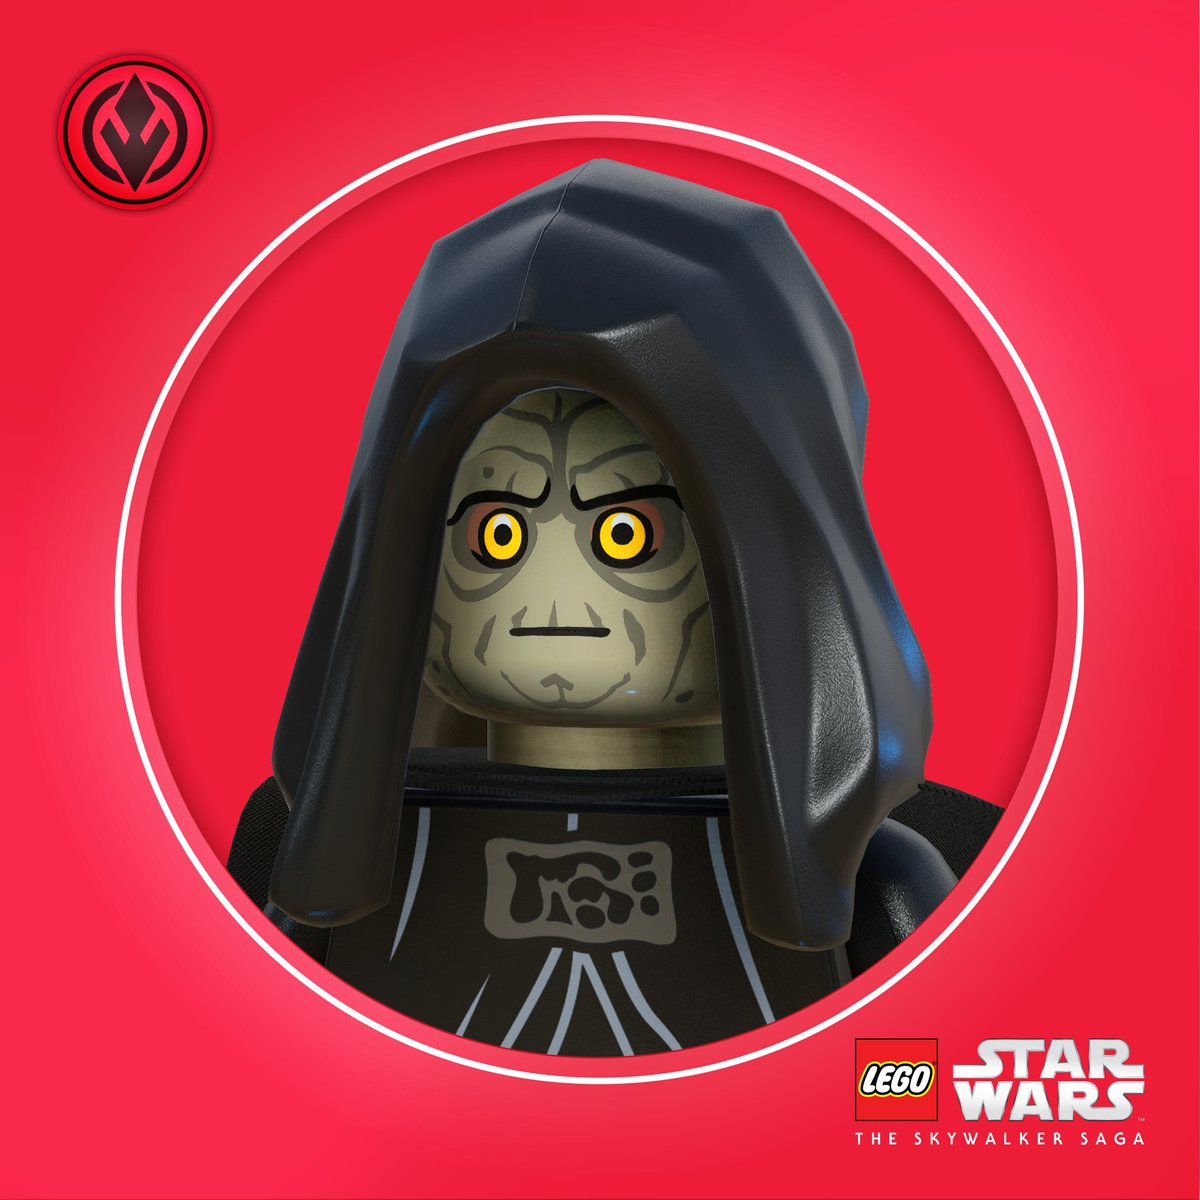 hat pakke frø LEGO on Twitter: "We have dibs on Salacious Crumb! Show your excitement for  The Skywalker Saga with a custom profile icon of your favorite character!  Find more options to choose from on @